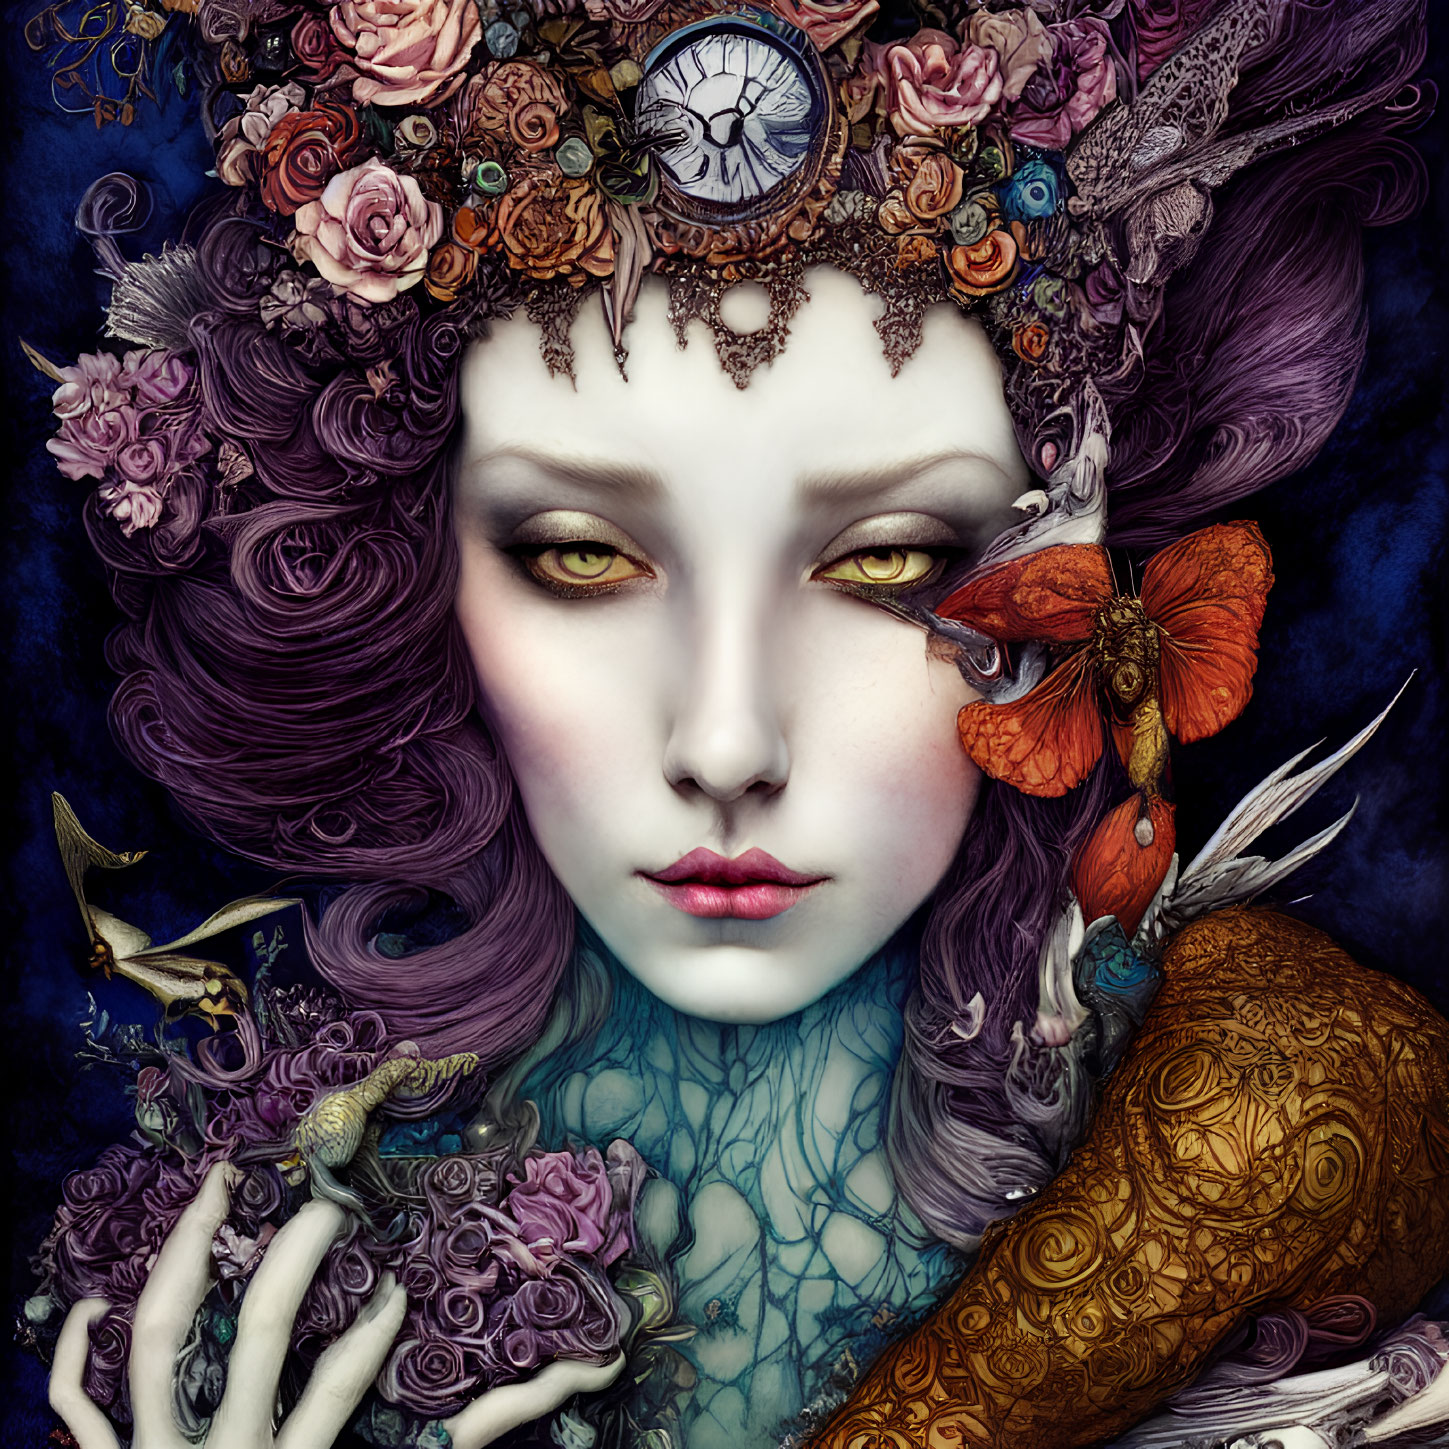 Fantasy female portrait with violet hair, clockwork headpiece, dragon figurine, and butterfly.